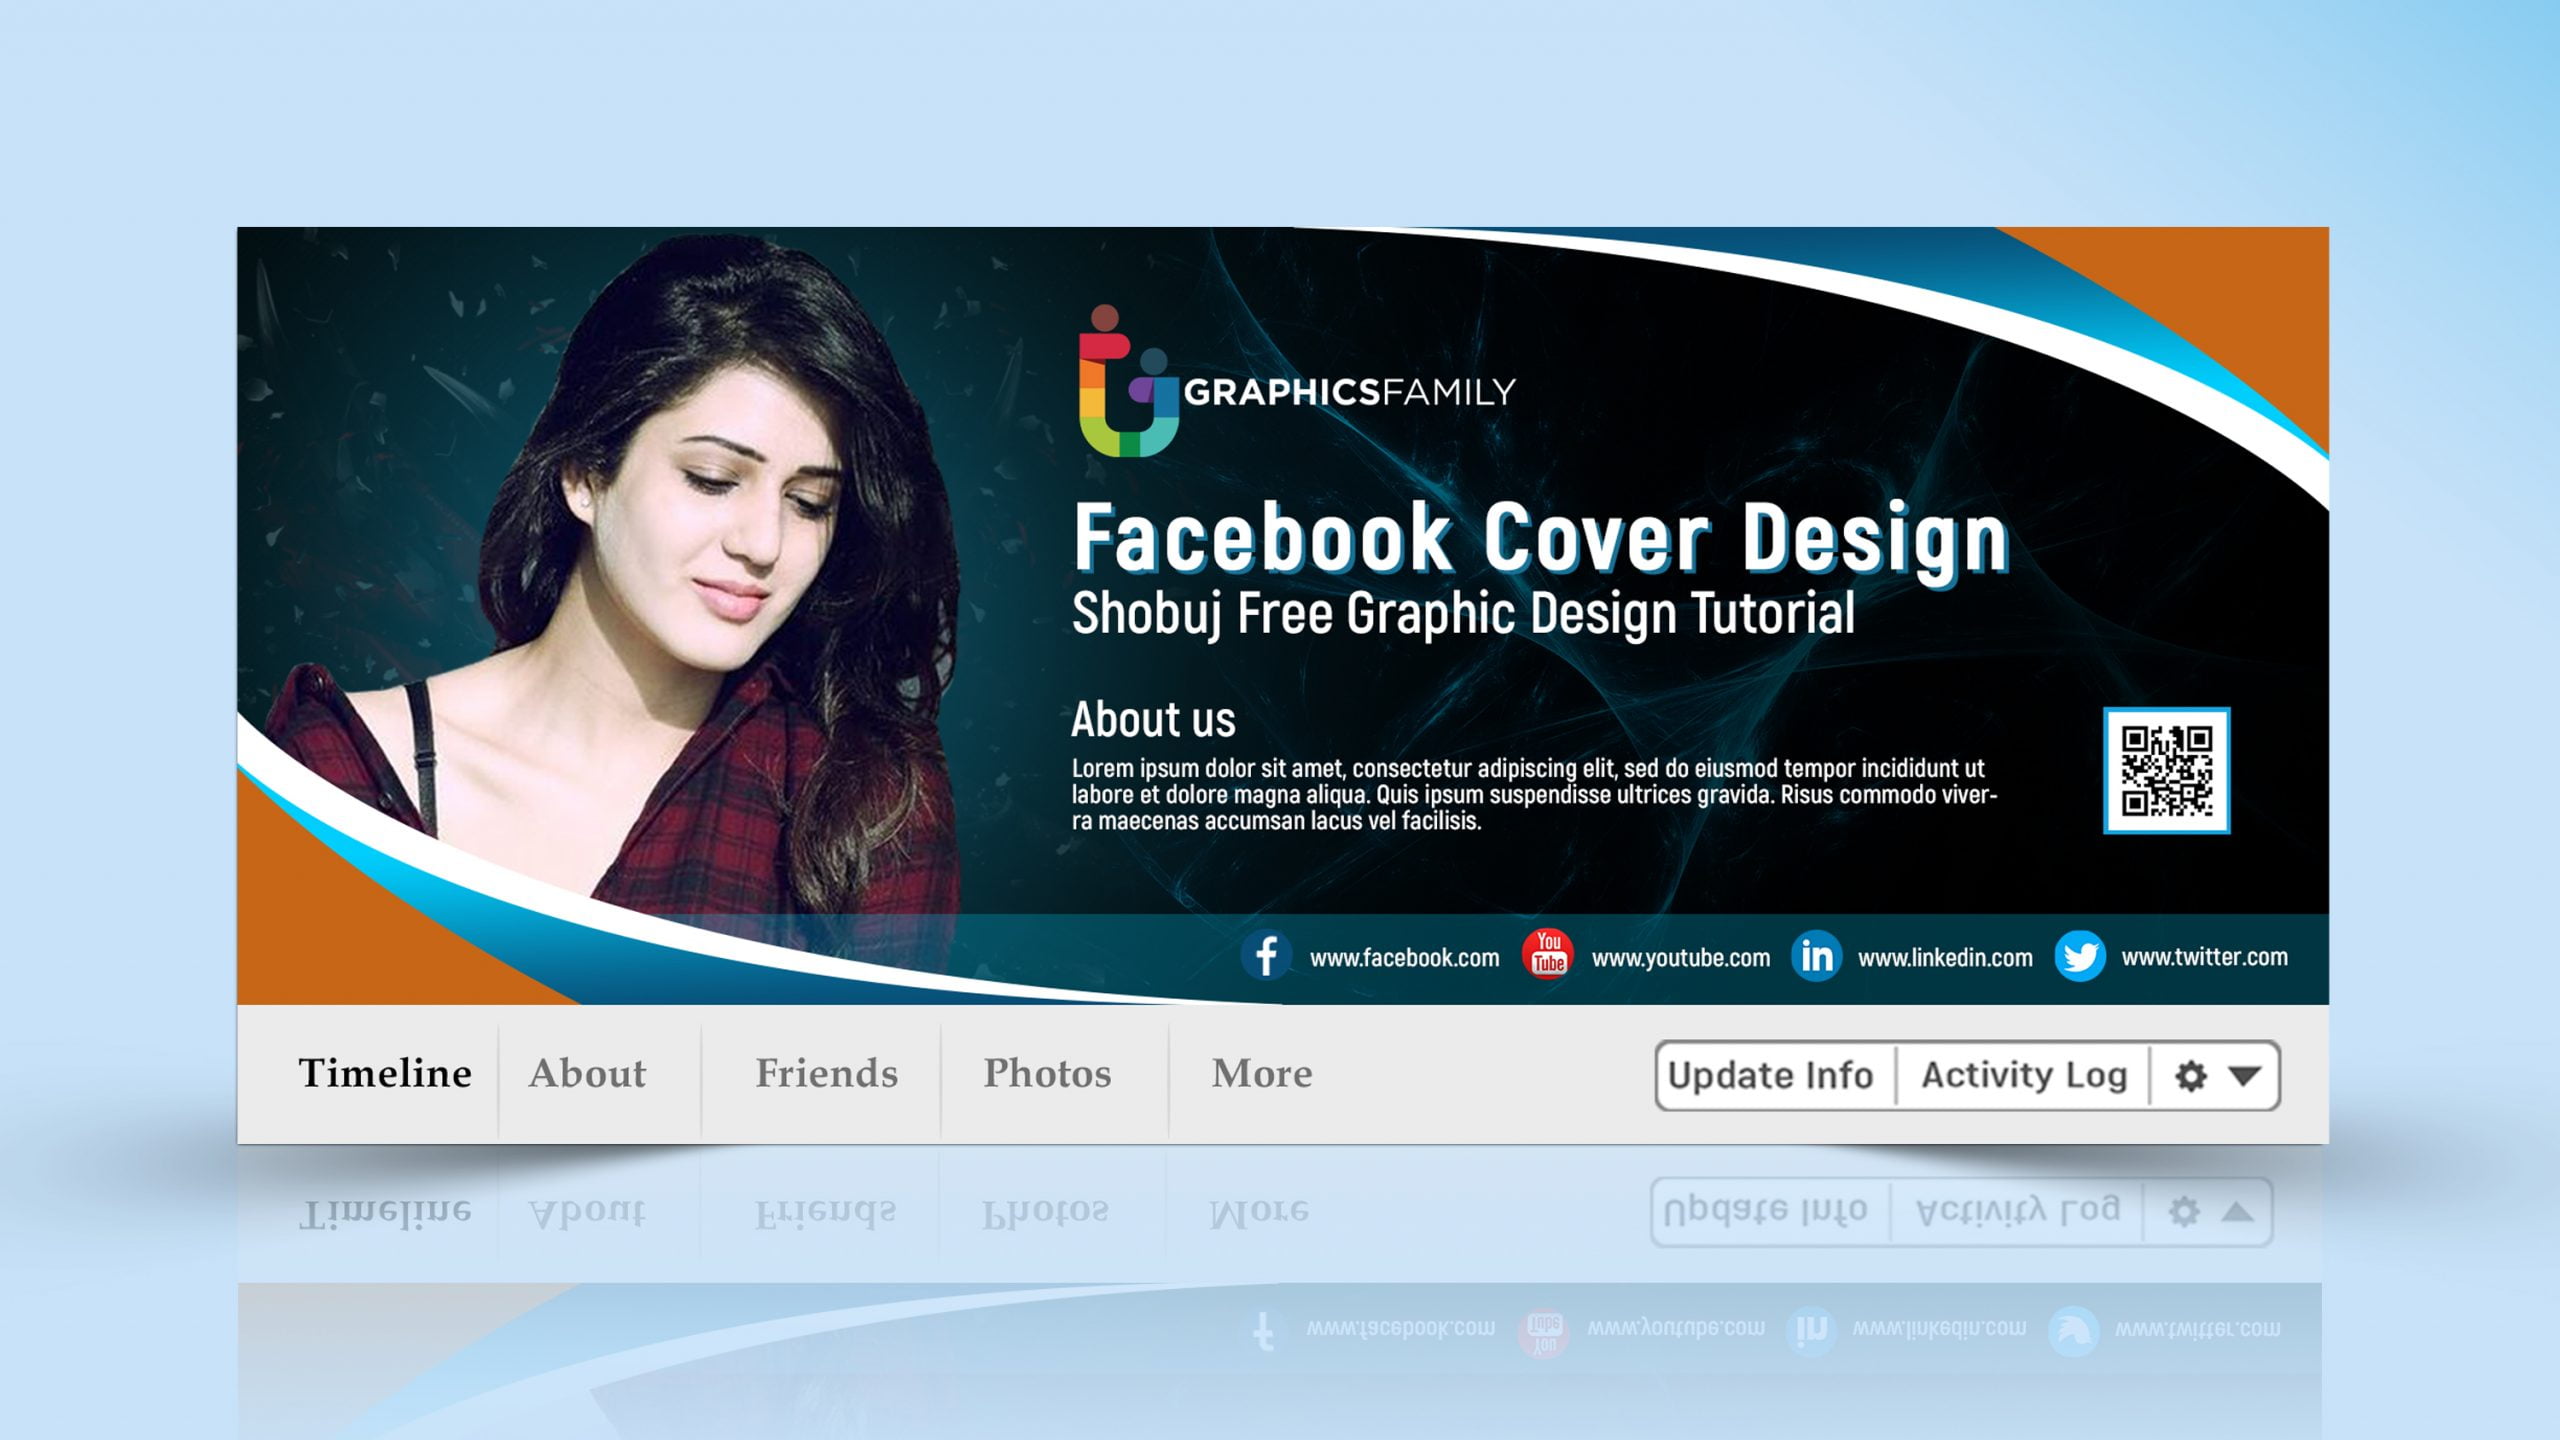 Design Cover Pages Online for Free